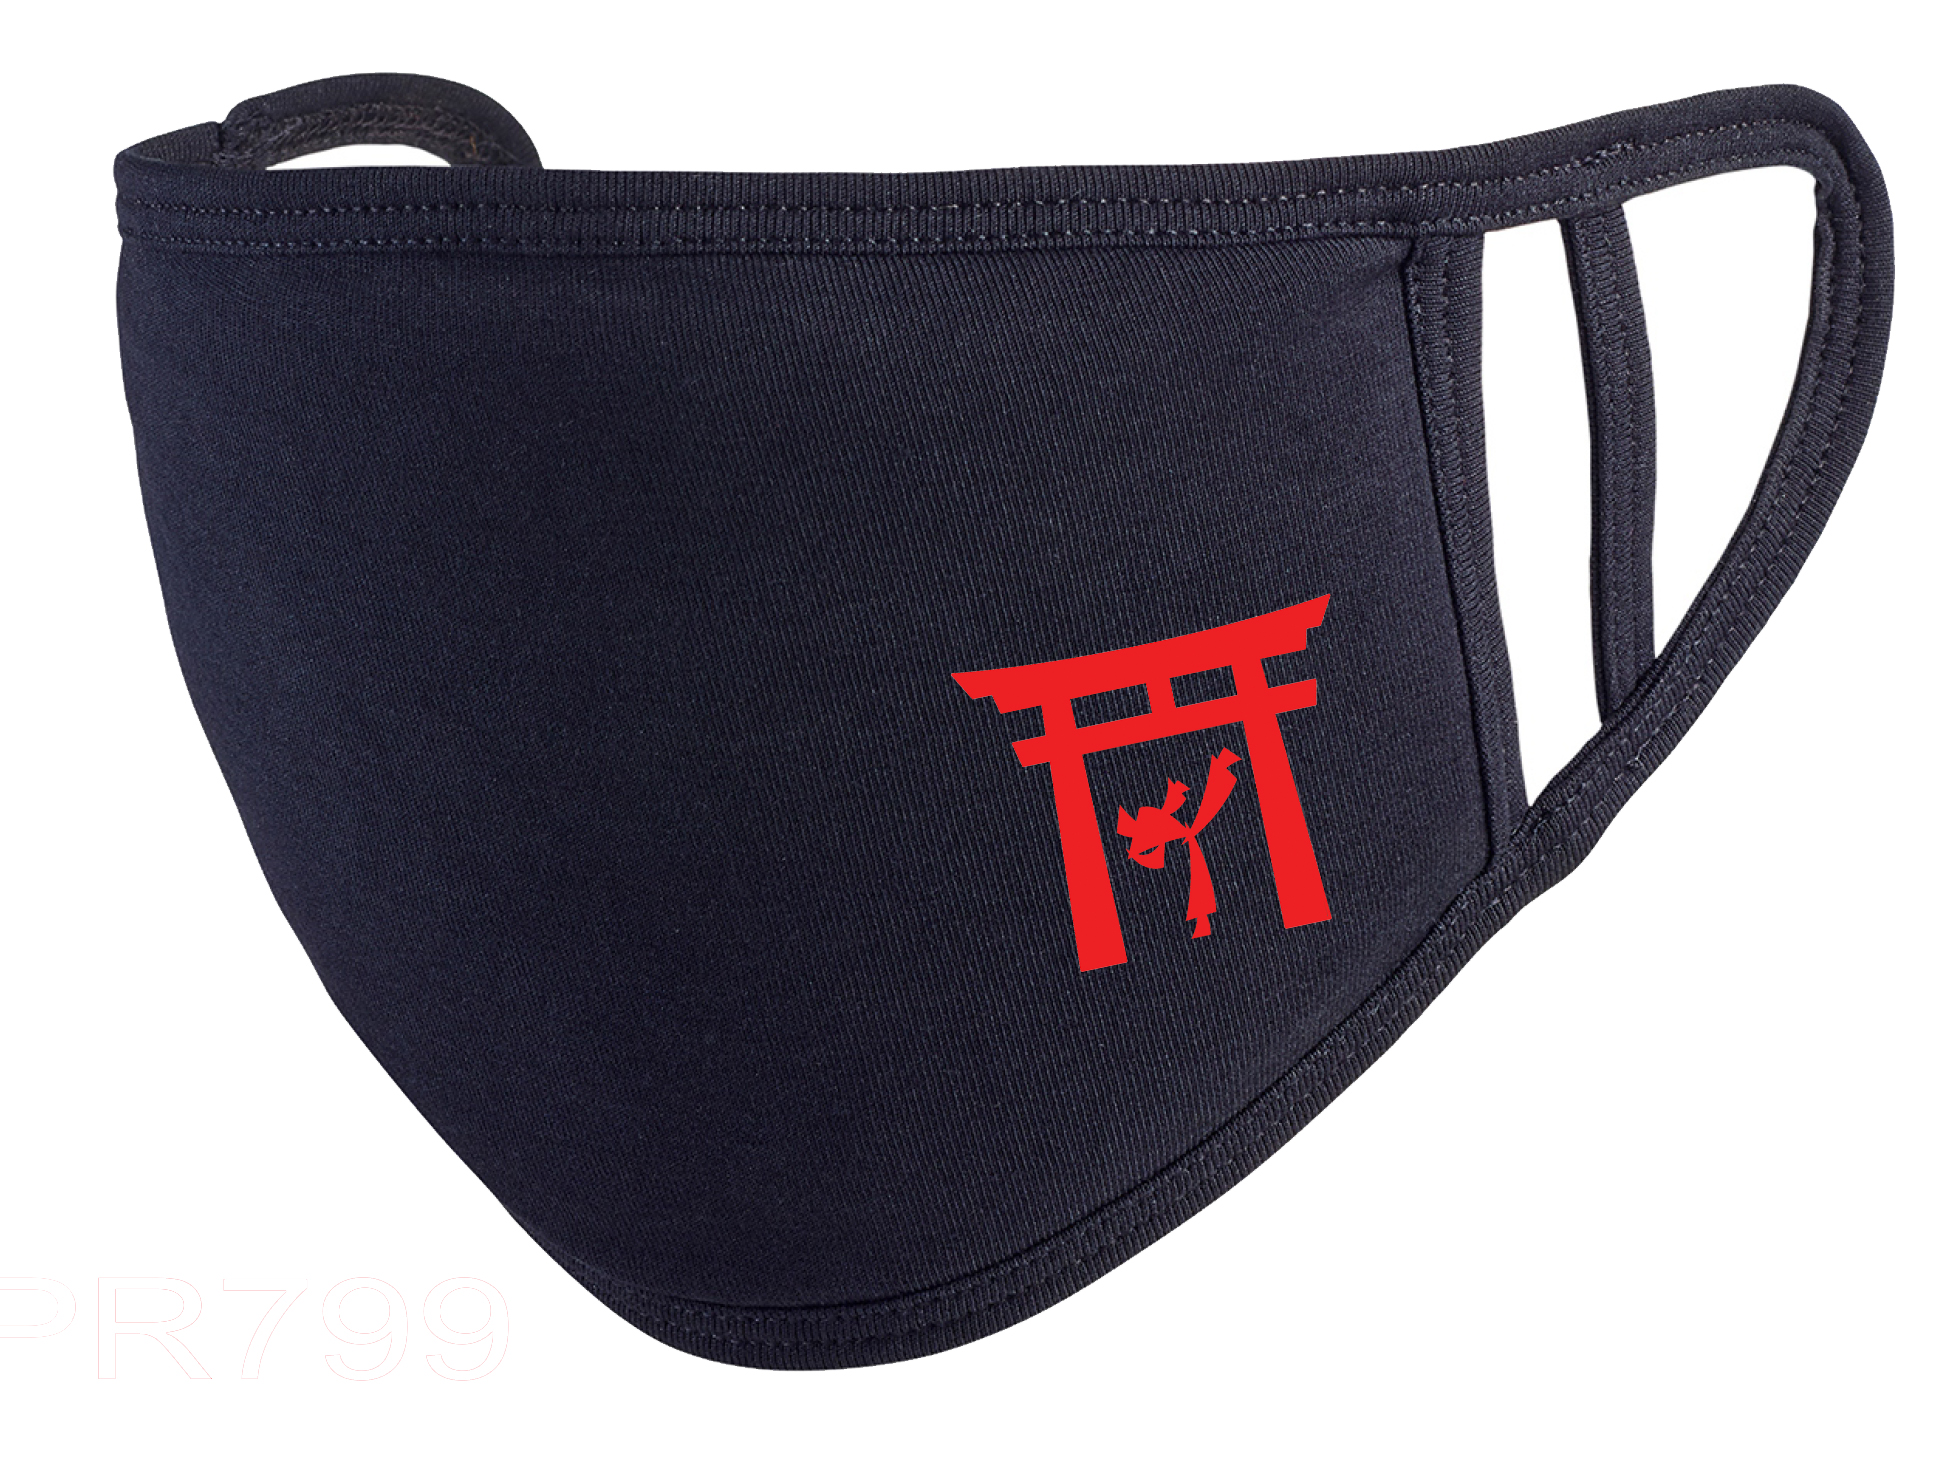 Karate Face Covering Mask